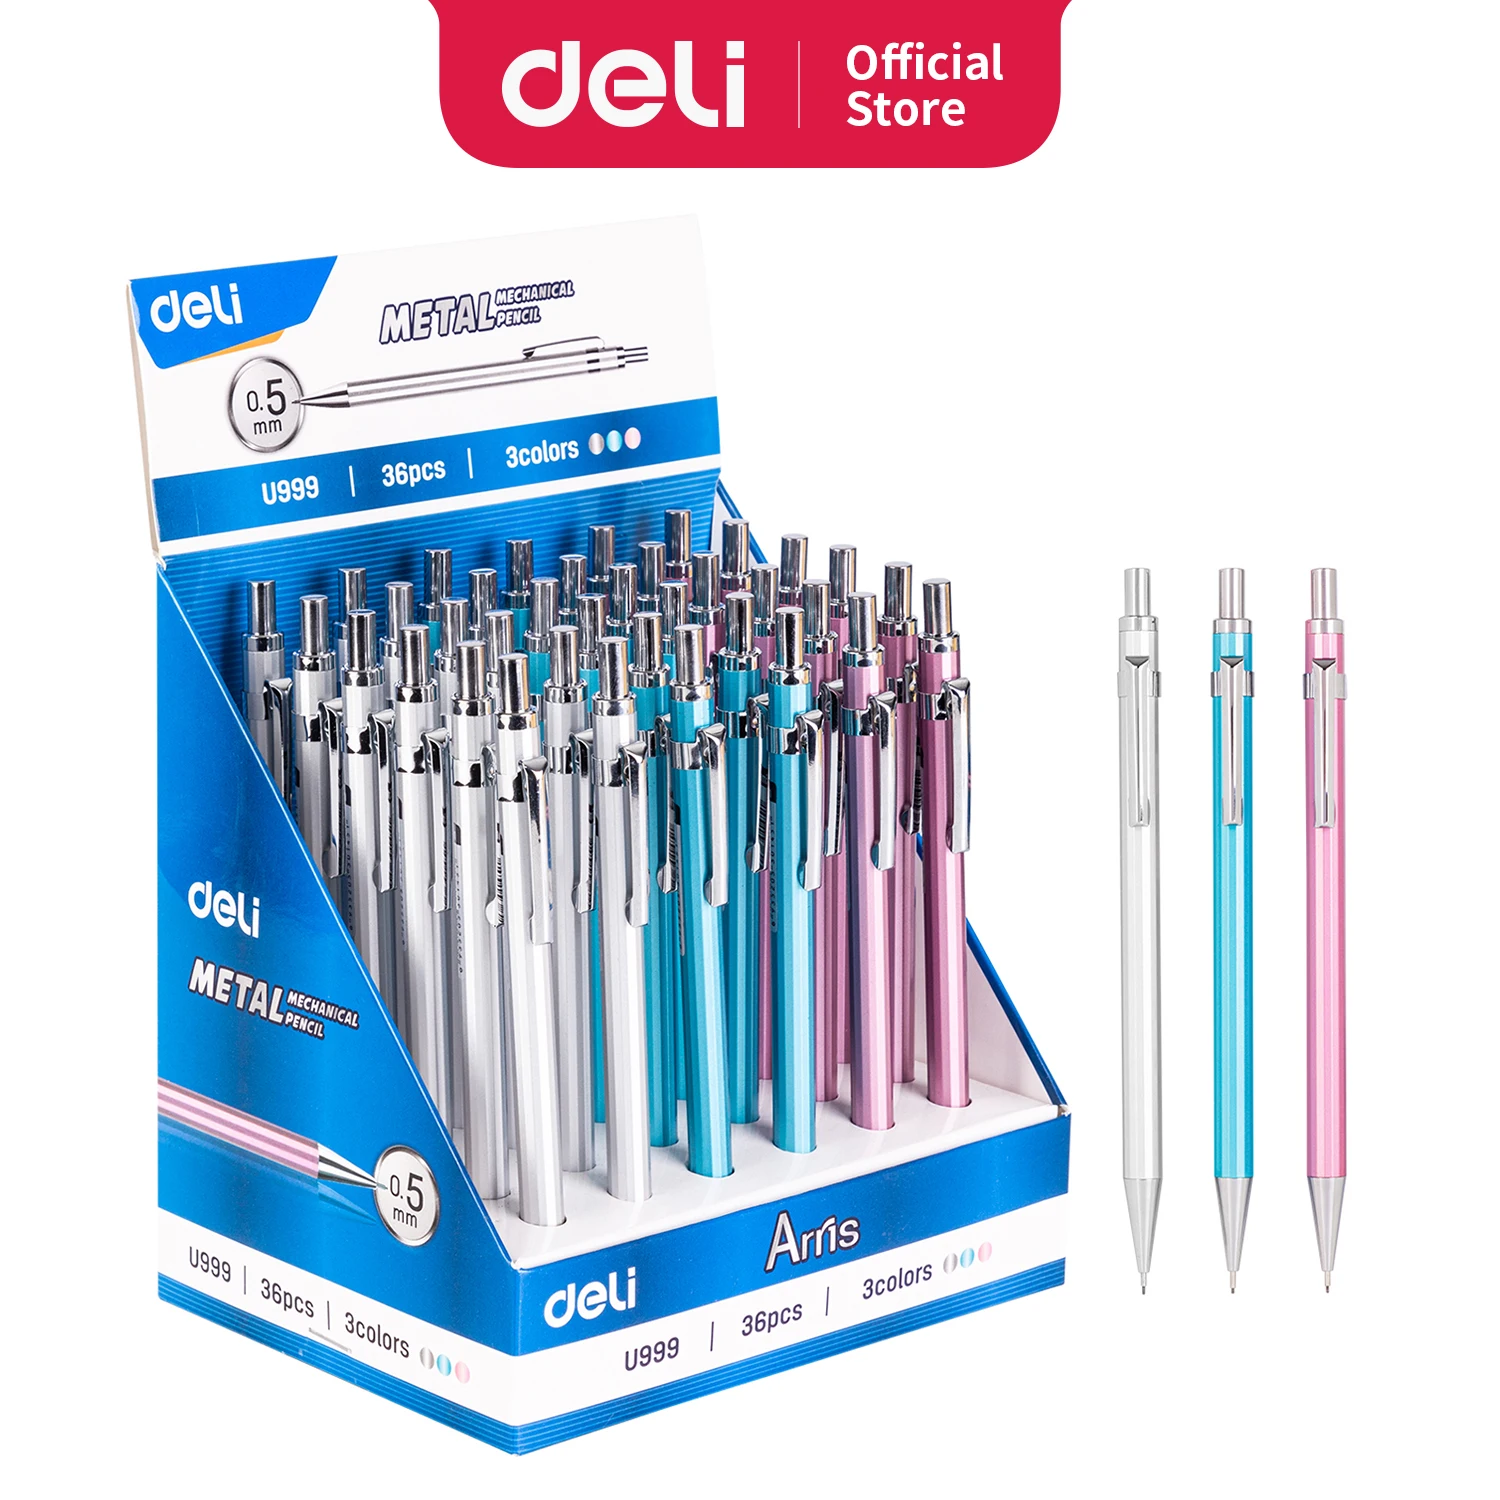 Deli Metal Mechanical Pencil 0.5mm 0.7mm with Lead Retractable Black Lead Pencils Stationery School Supplies Art Sketch Writing deli 8 12 21 colors professional solid watercolor paints with brilliant color painting brush for beginner drawing art supplies